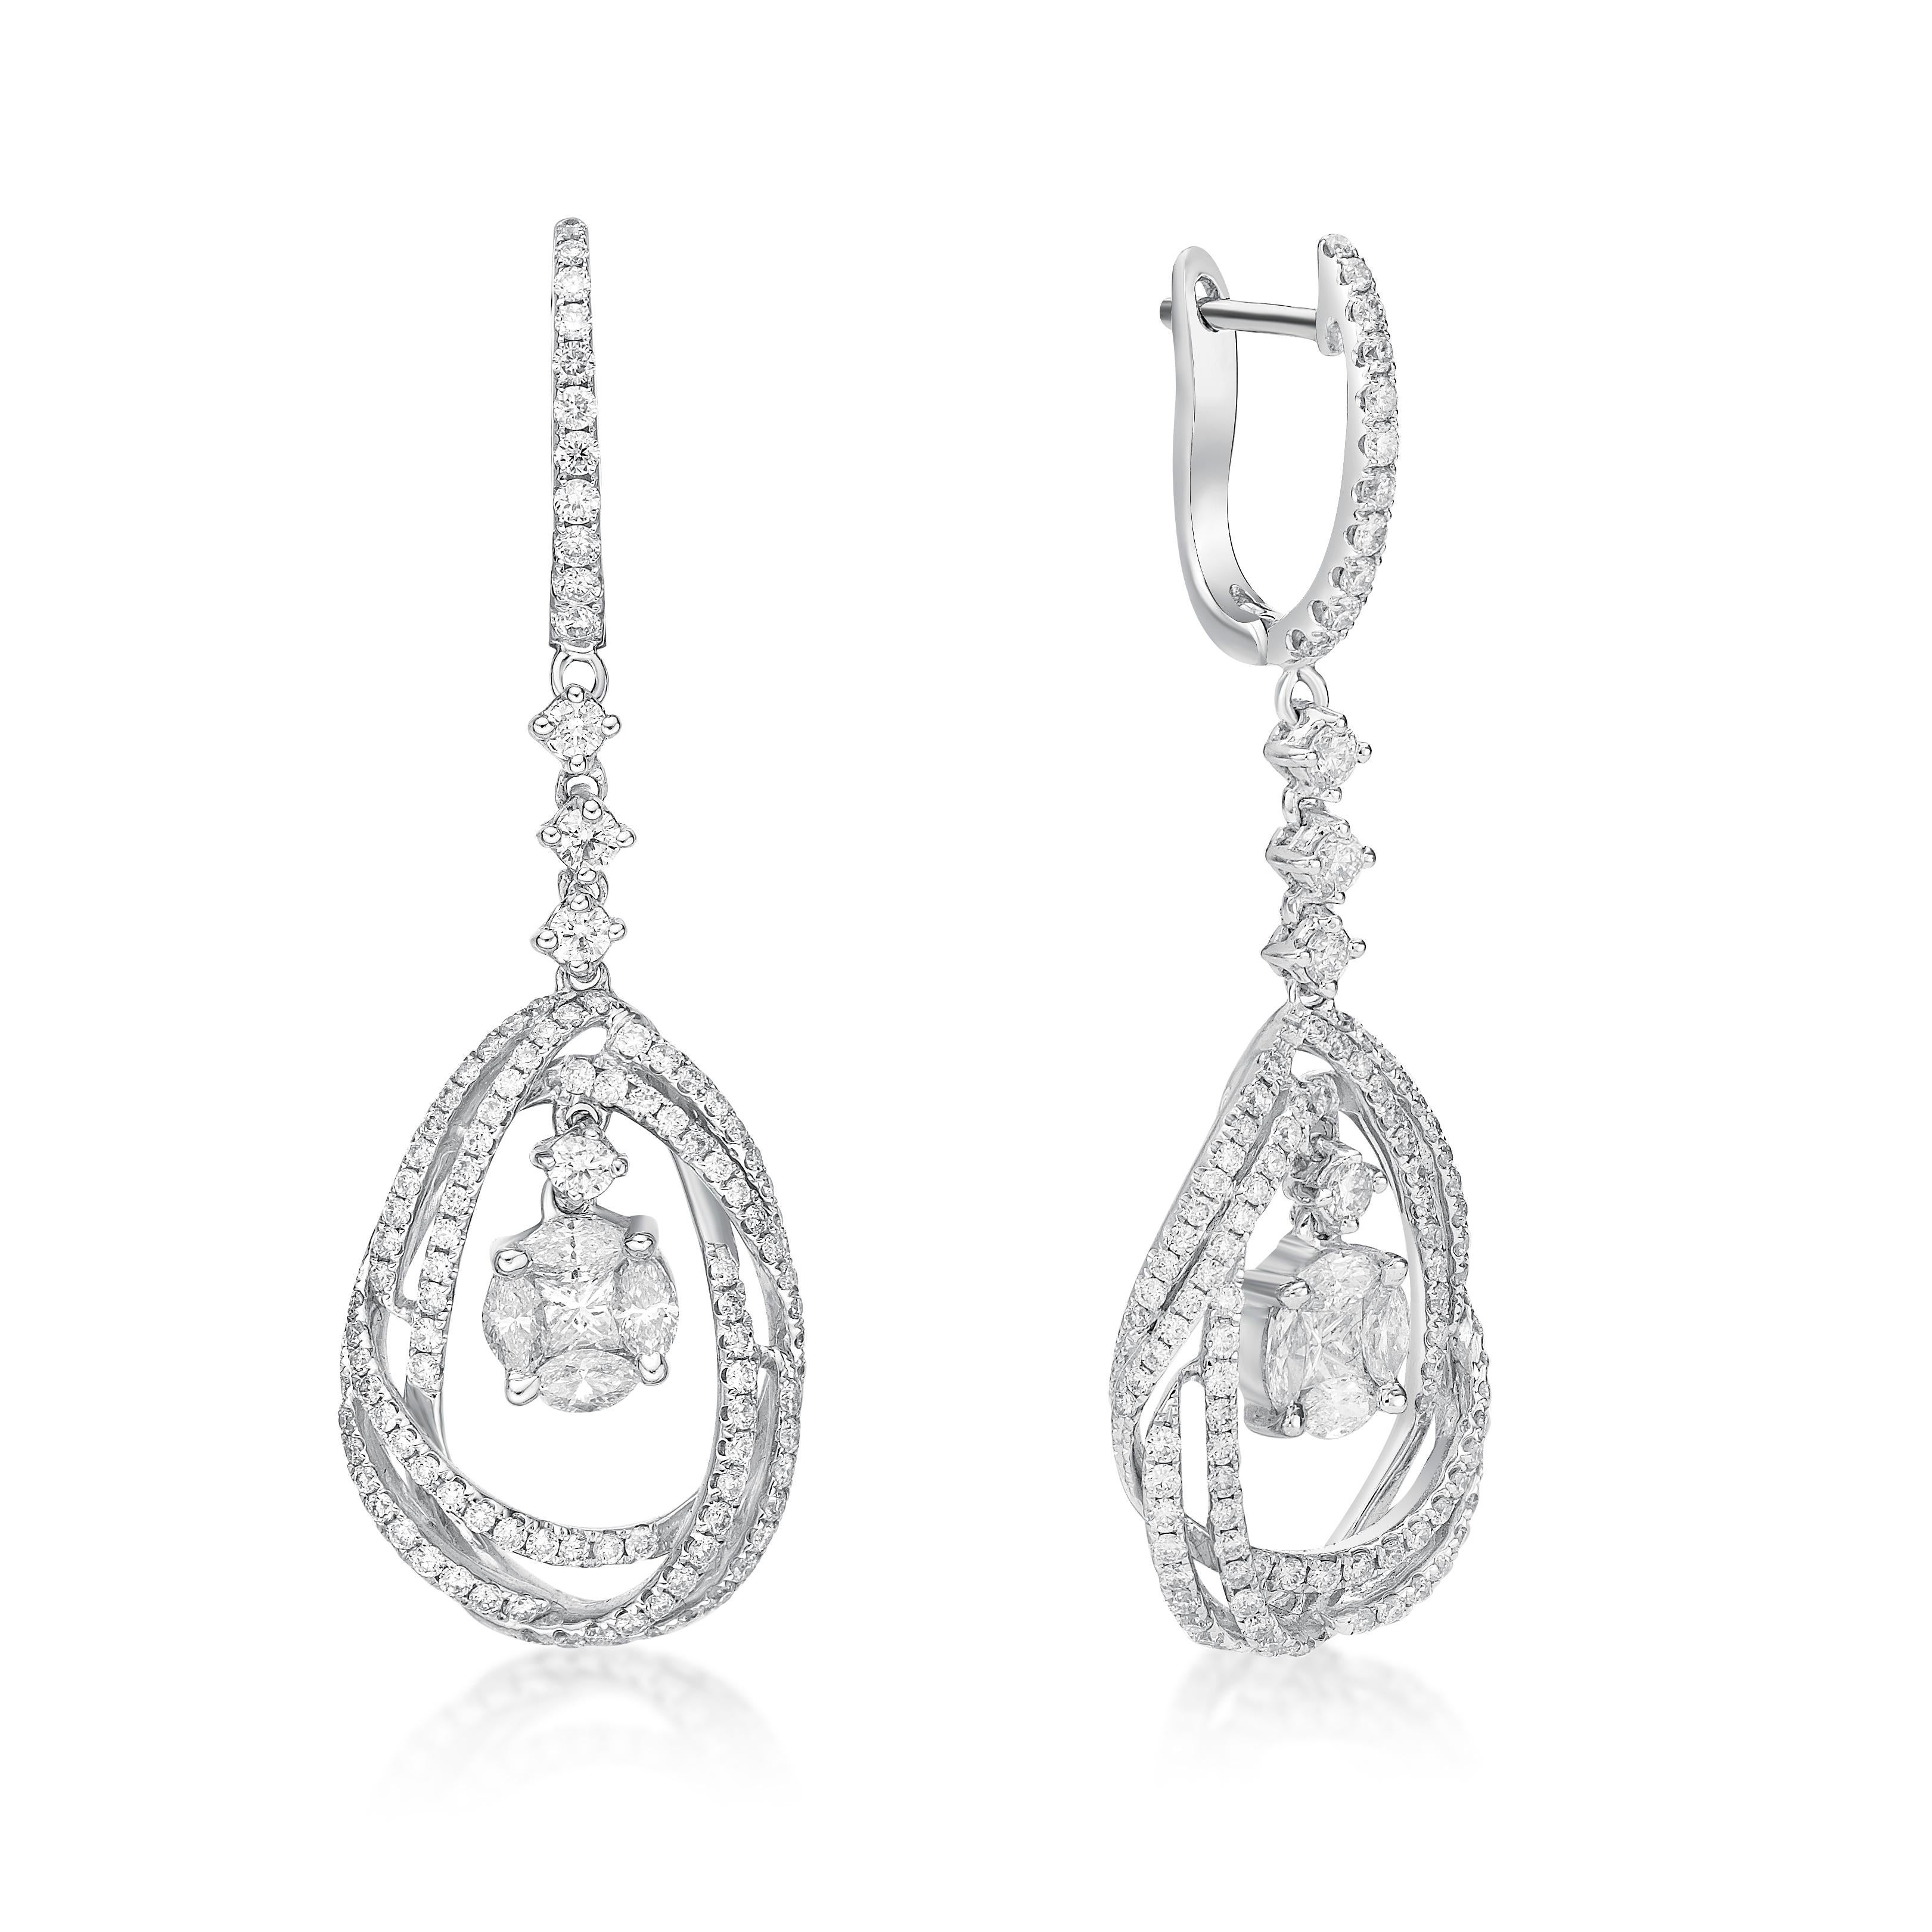 Diamonds are symbols of purity, unity, and love. They absorb and amplify energy, both positive and negative. They are also connected to the energy of wealth and are helpful in attracting abundance and manifesting.

The earring setting with 234 piece